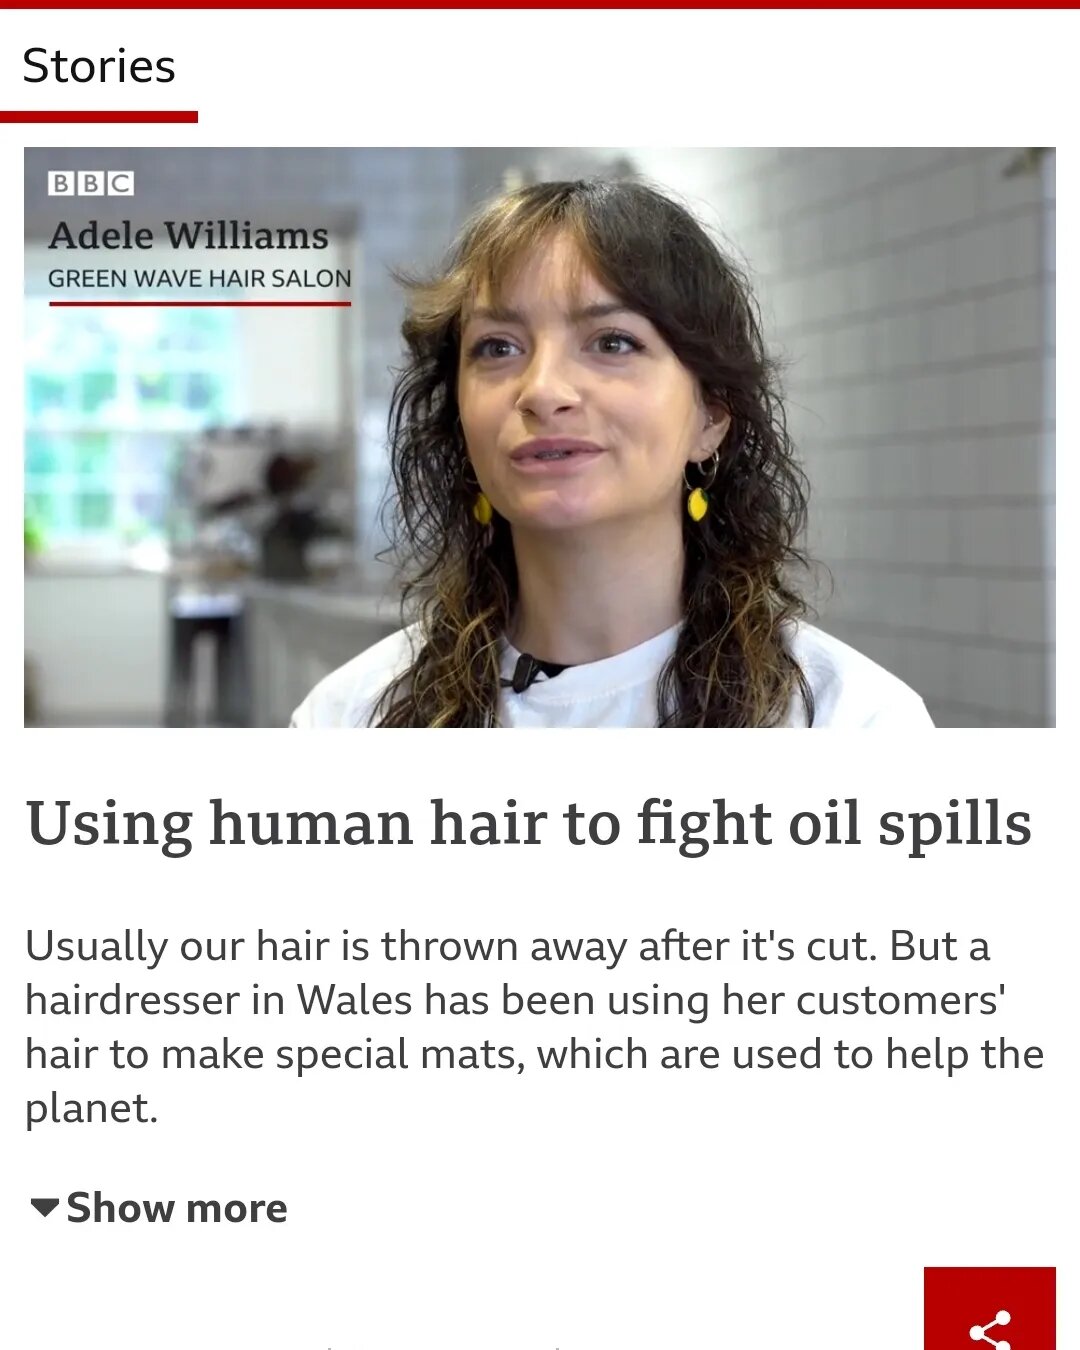 Recycling hair in Wales